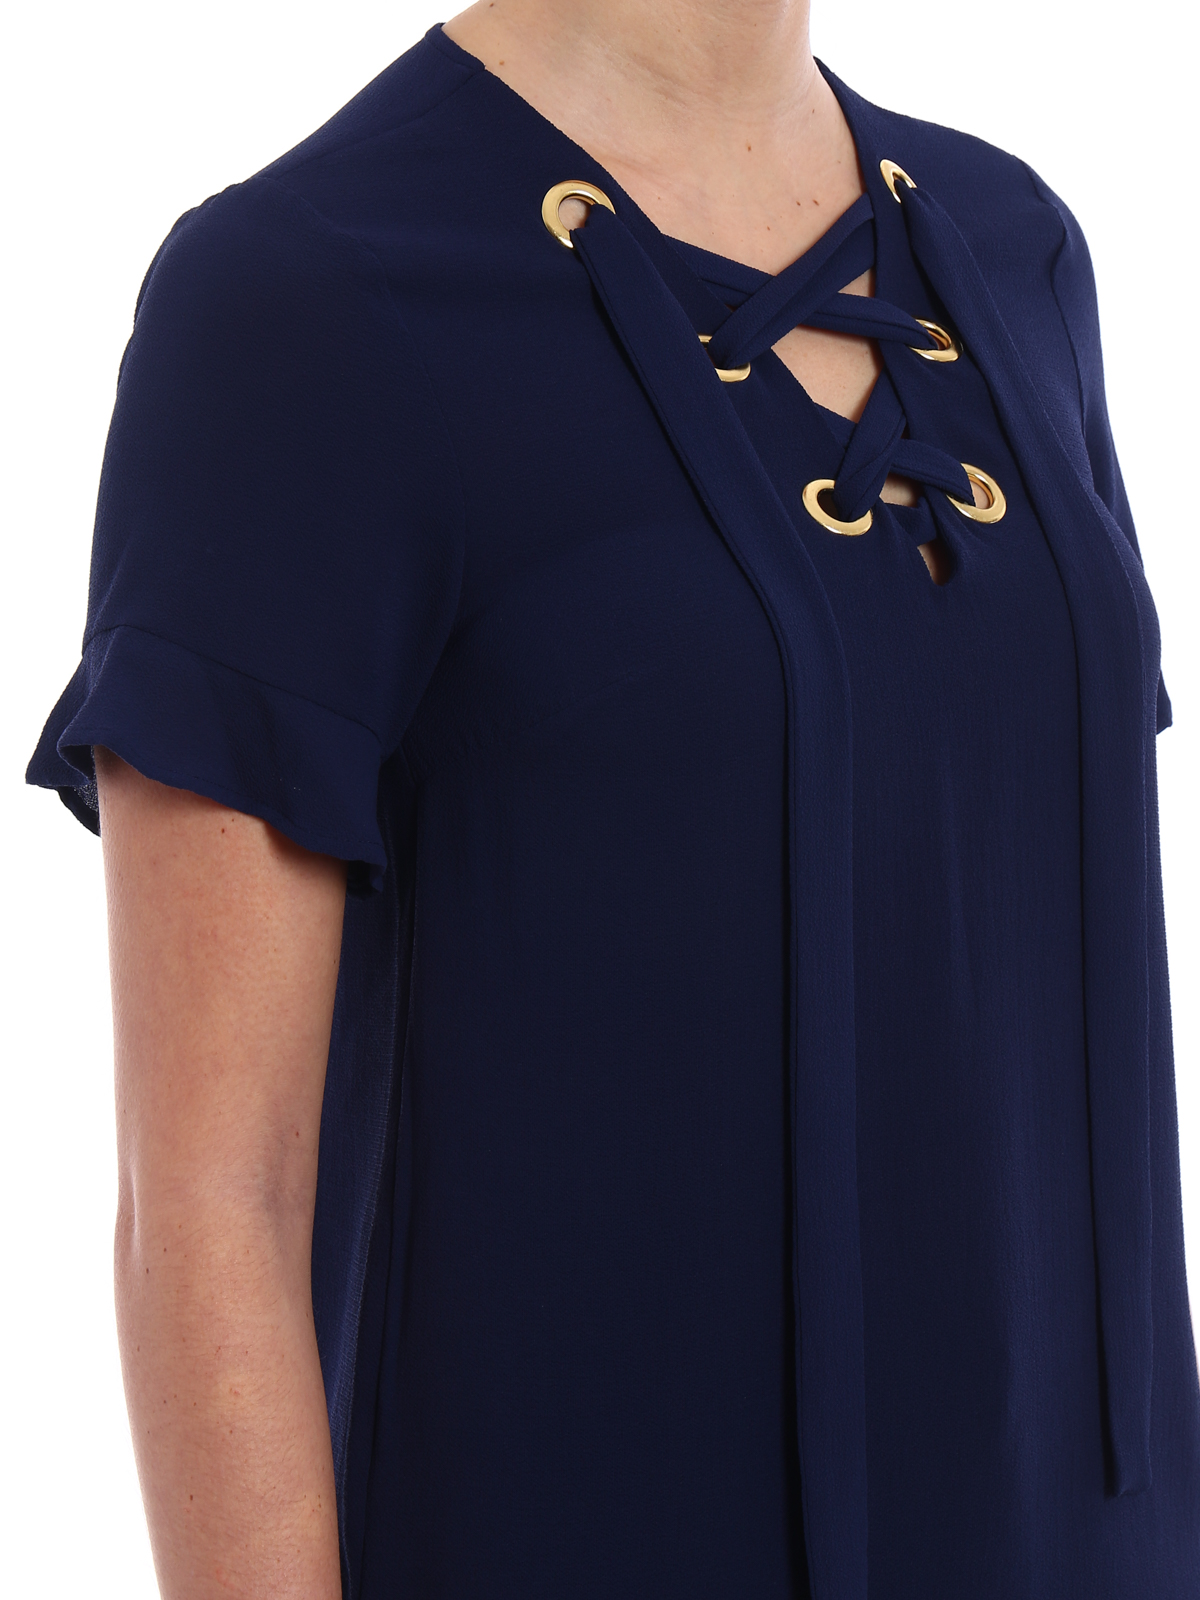 Michael Kors - Blue crepe blouse with 